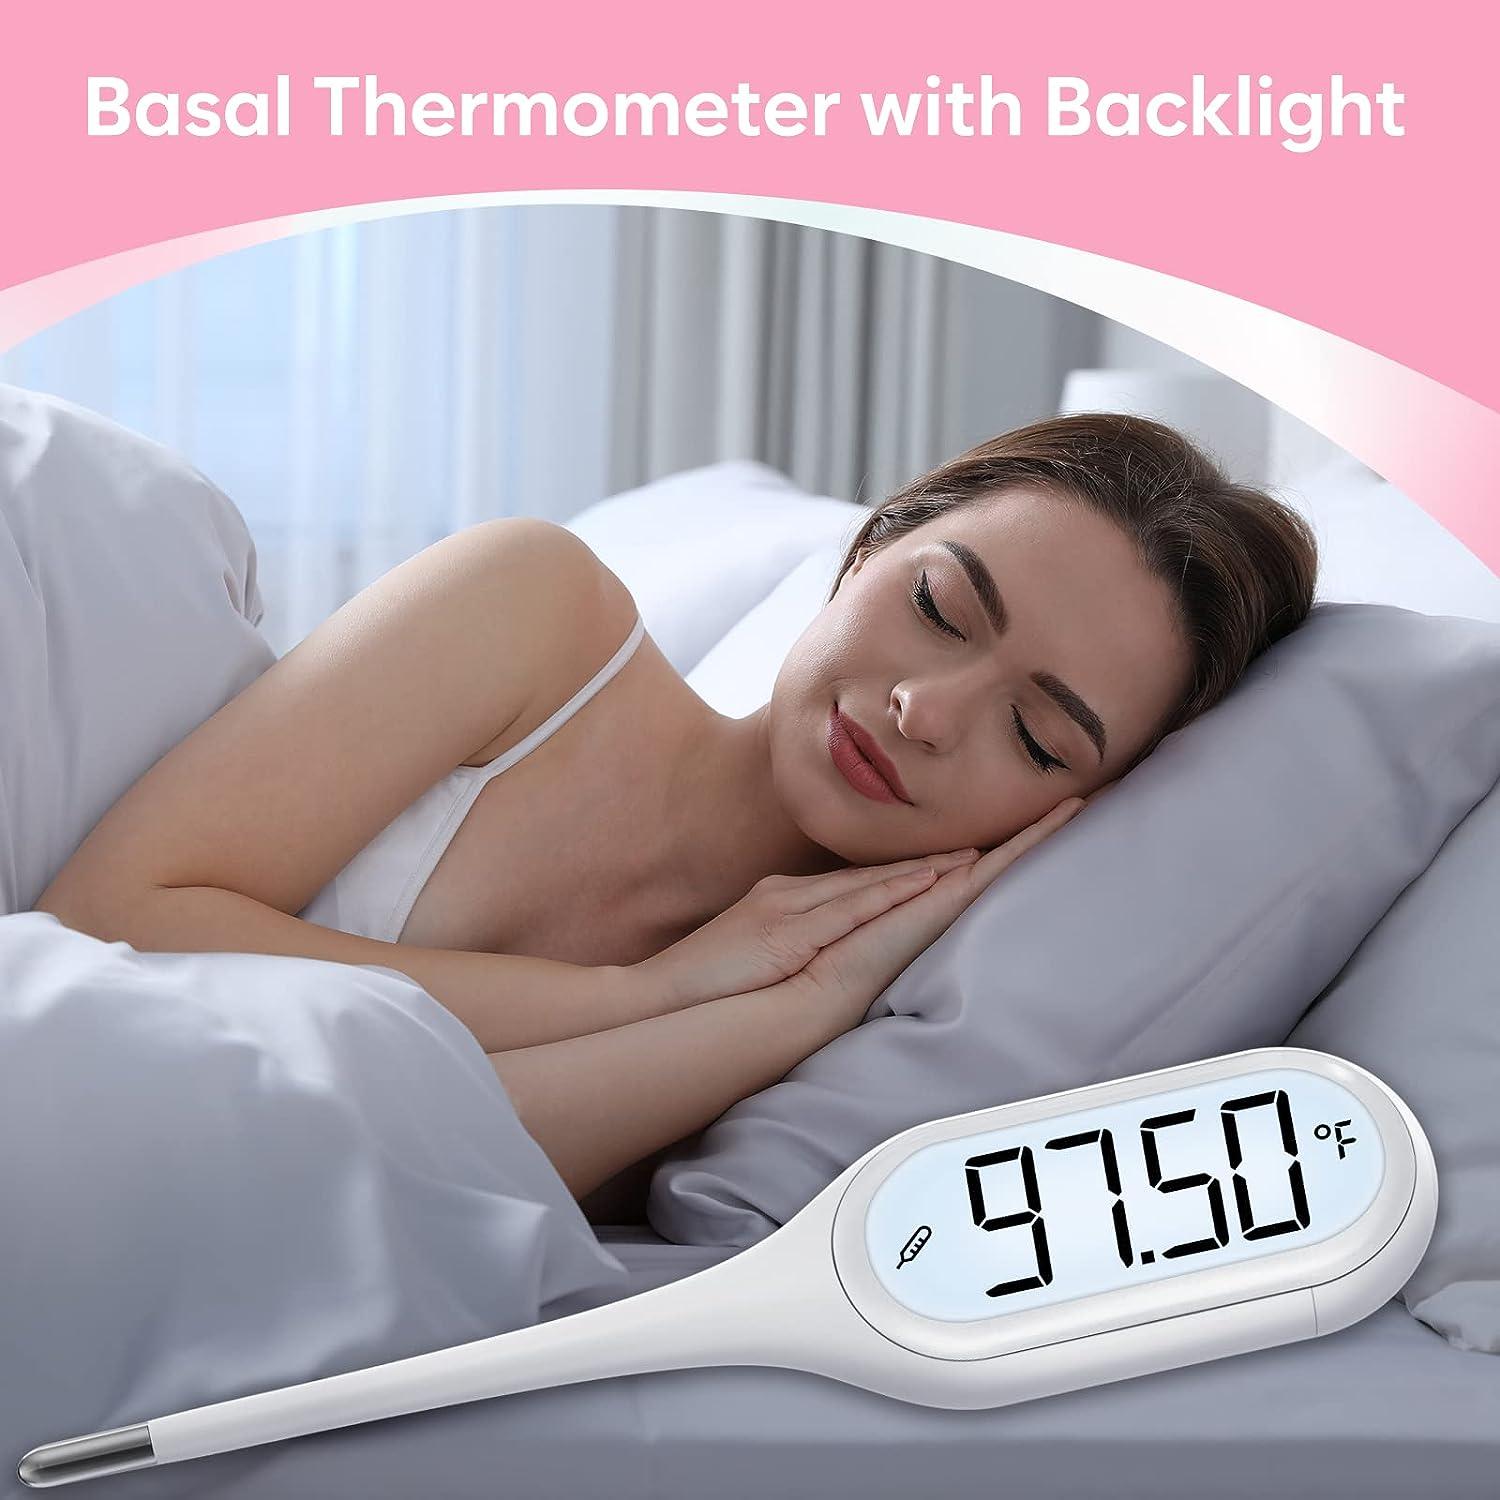 Fast, Accurate Digital Basal Body Temperature Thermometer